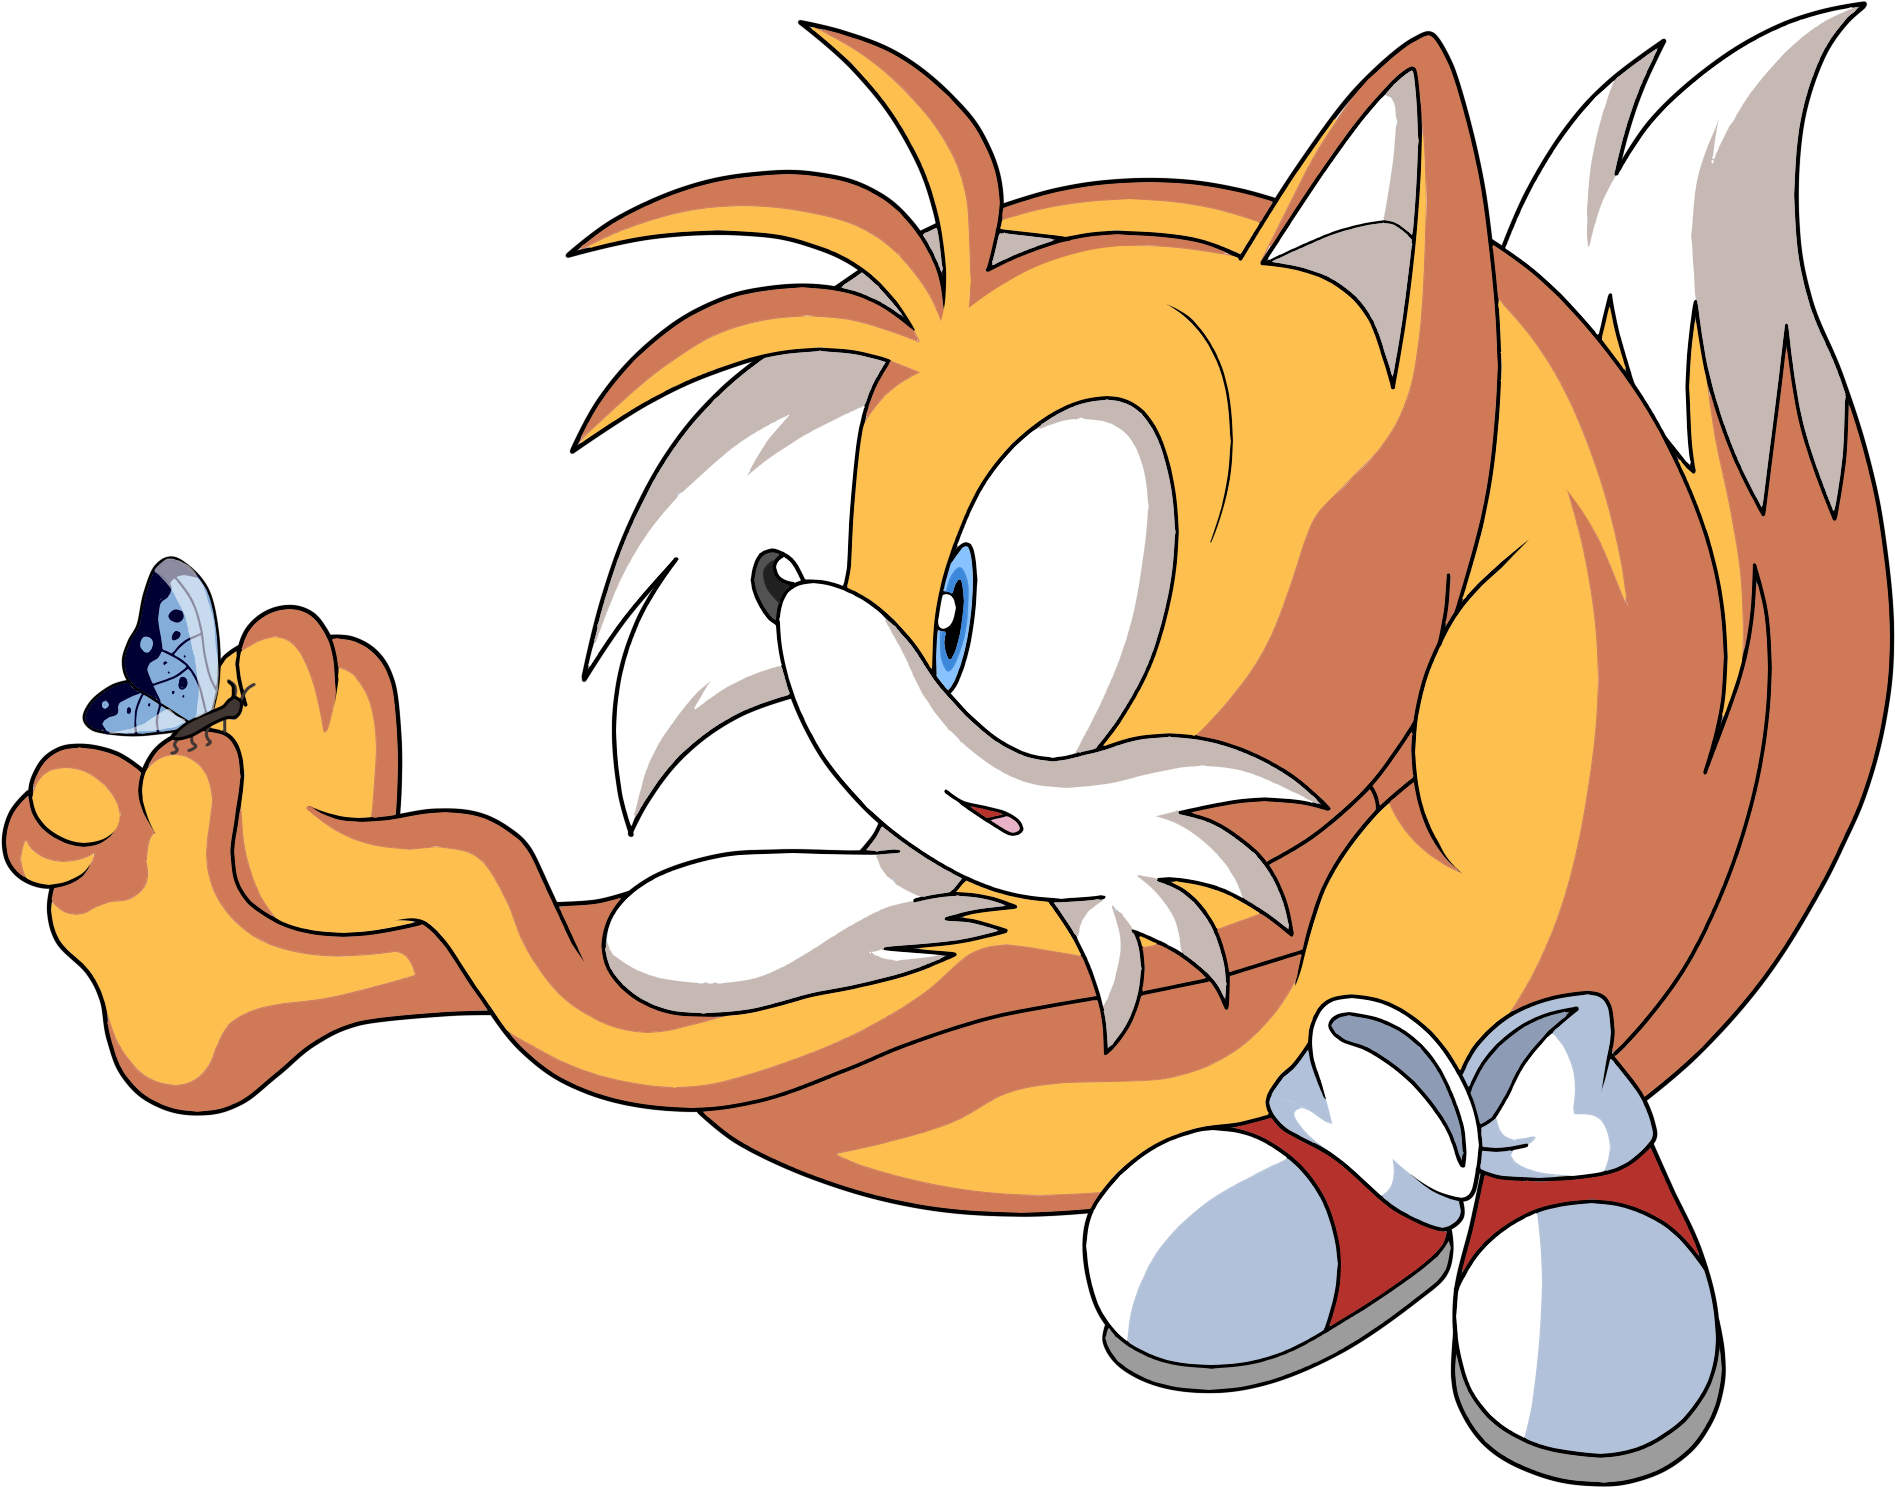 Tails Prower Shoes. Тейлз Прауэр. Лисёнок Тейлз. Miles Tails Prower. Tails animations